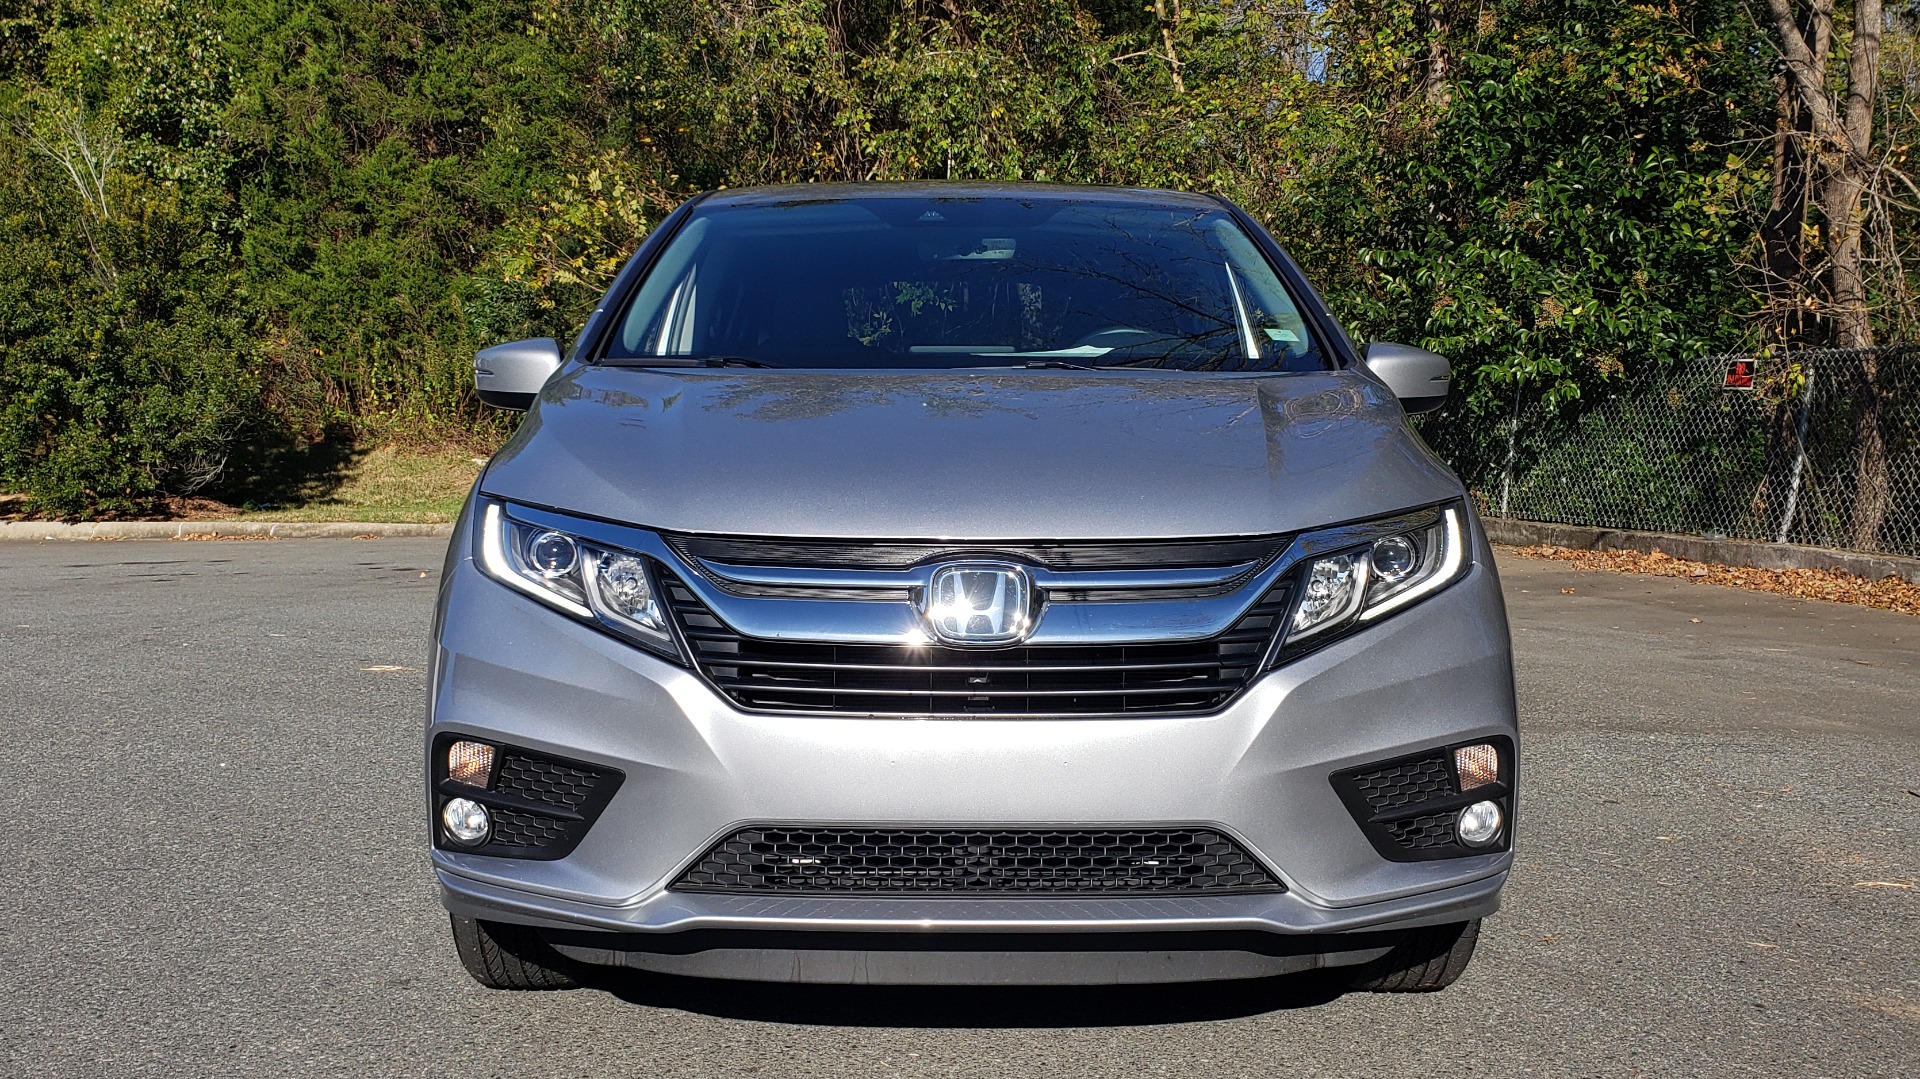 Used 2019 Honda ODYSSEY EX-L BRAUNABILITY / NAV / RES / LKA / BLUE-RAY / SUNROOF / REARVIEW for sale Sold at Formula Imports in Charlotte NC 28227 55